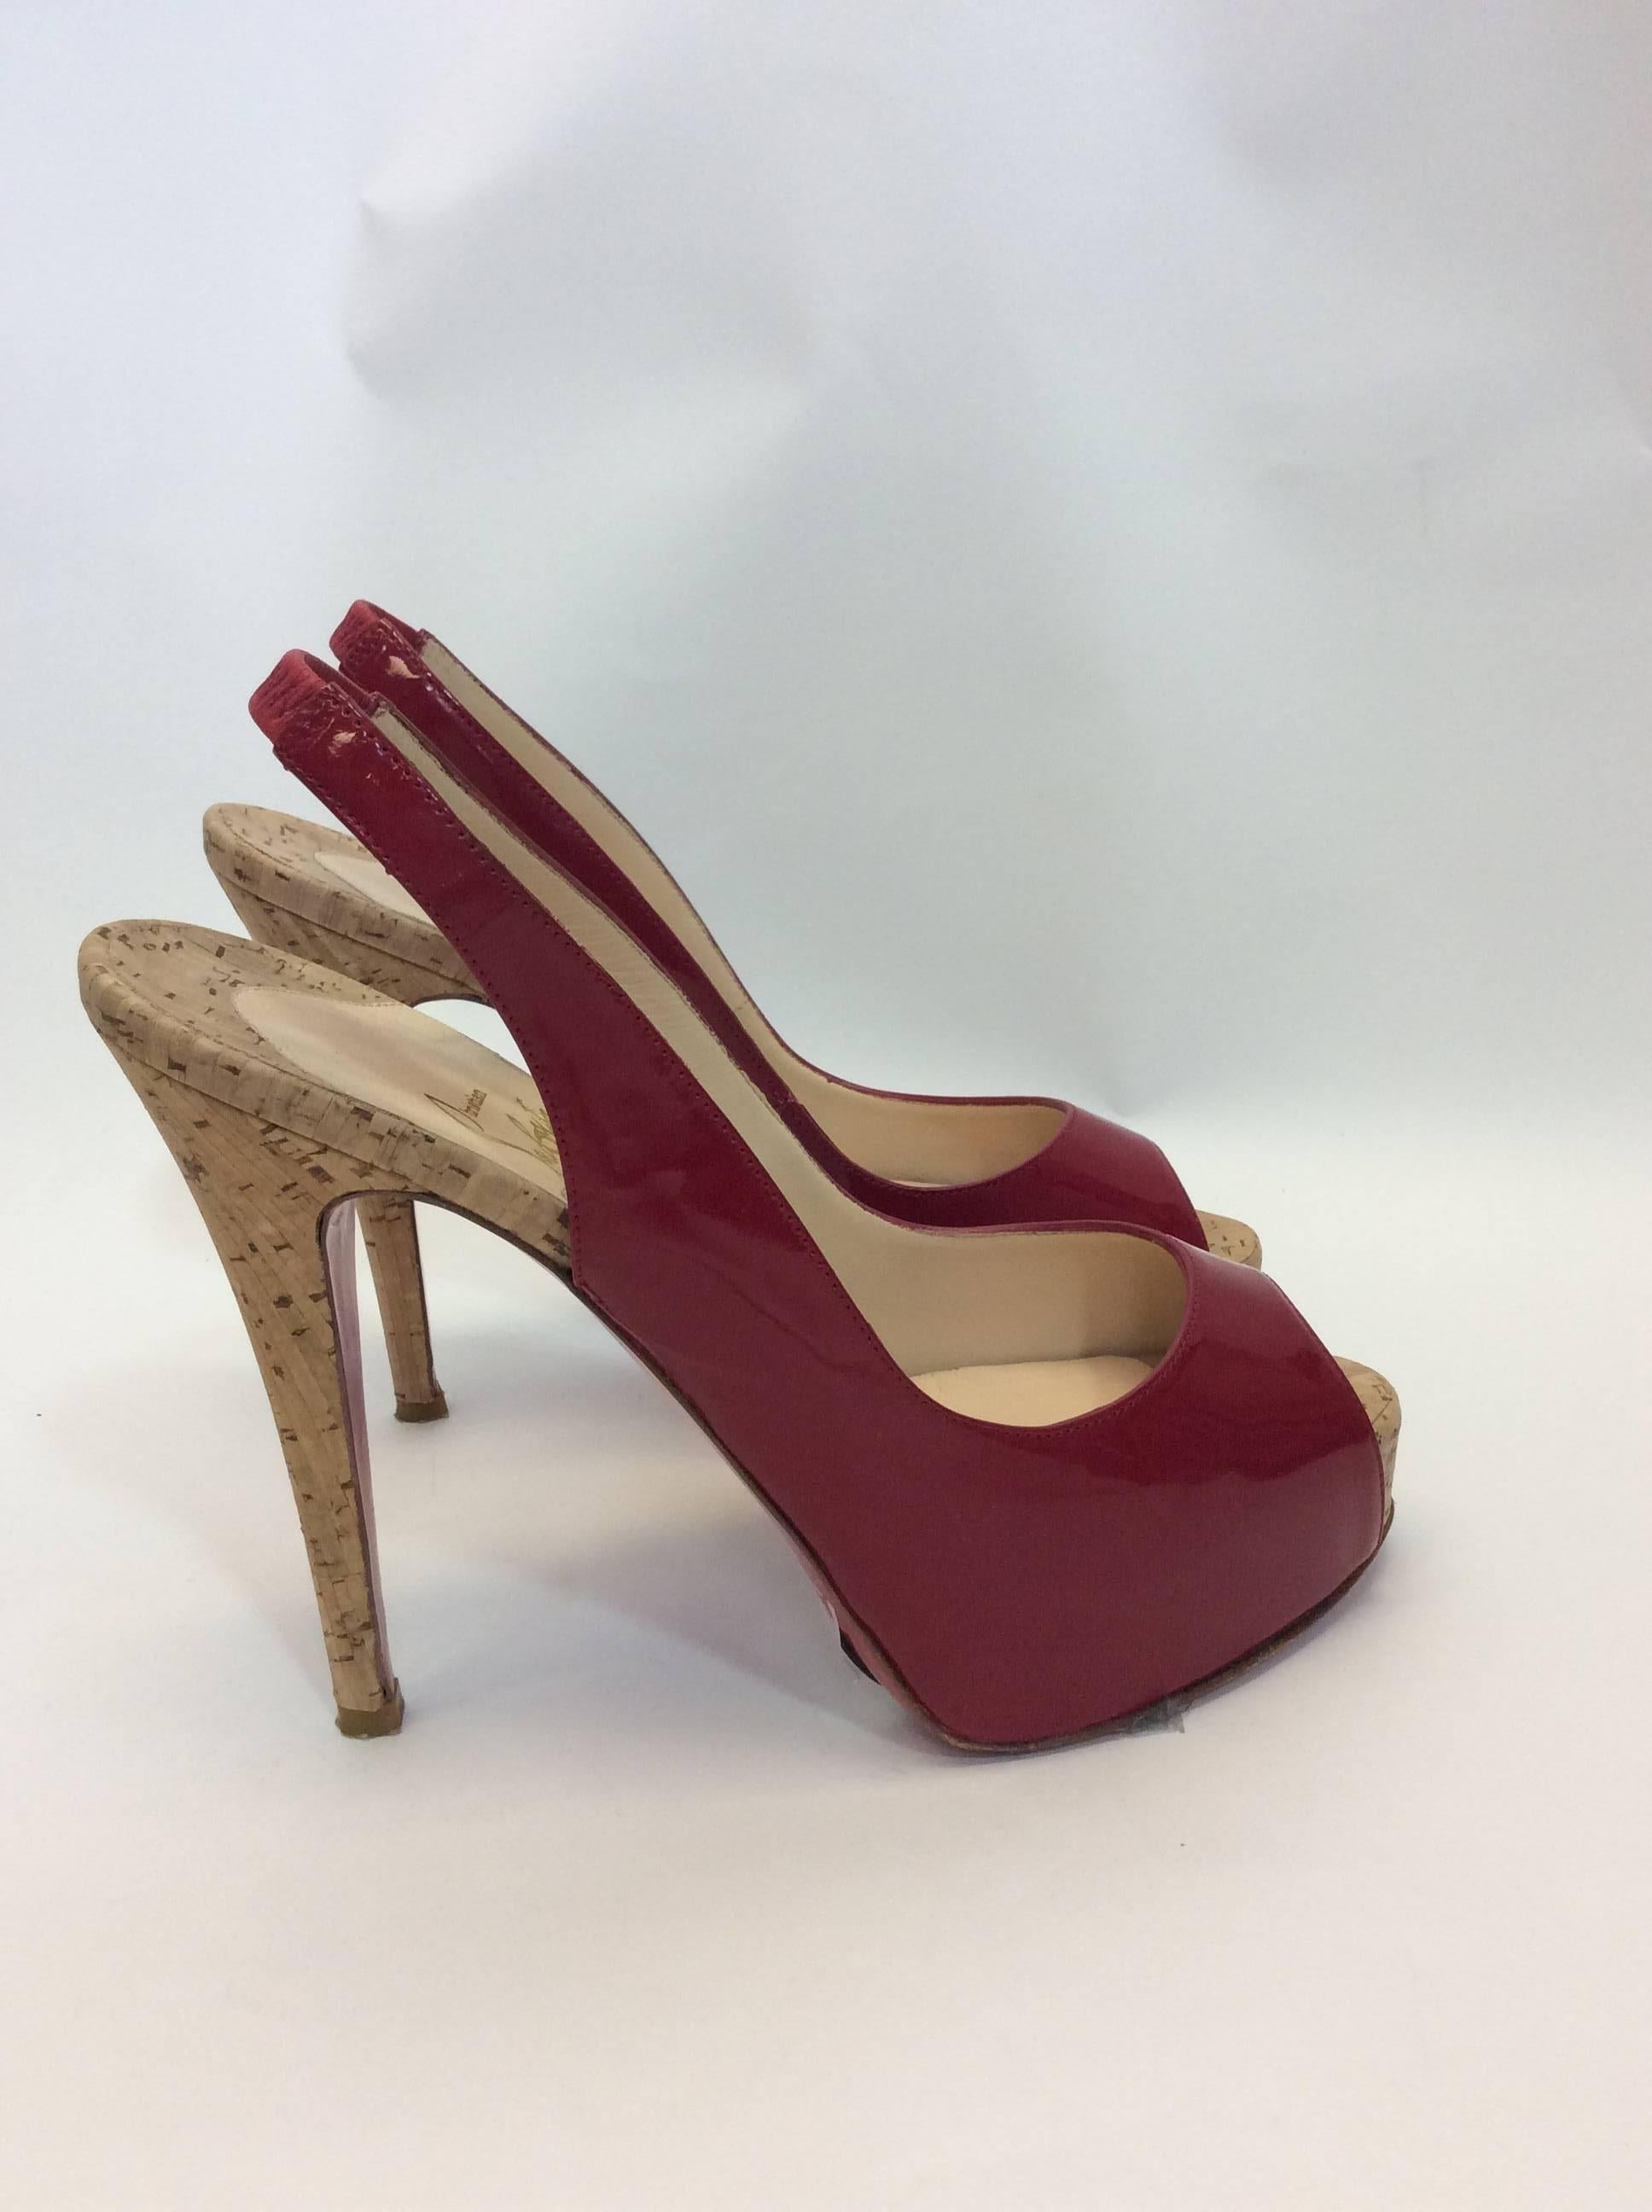 Christian Louboutin Patent Leather Peep Toe Pumps
Red patent leather
Cork material base
Size 37
$350
5 inch heel
Made in France